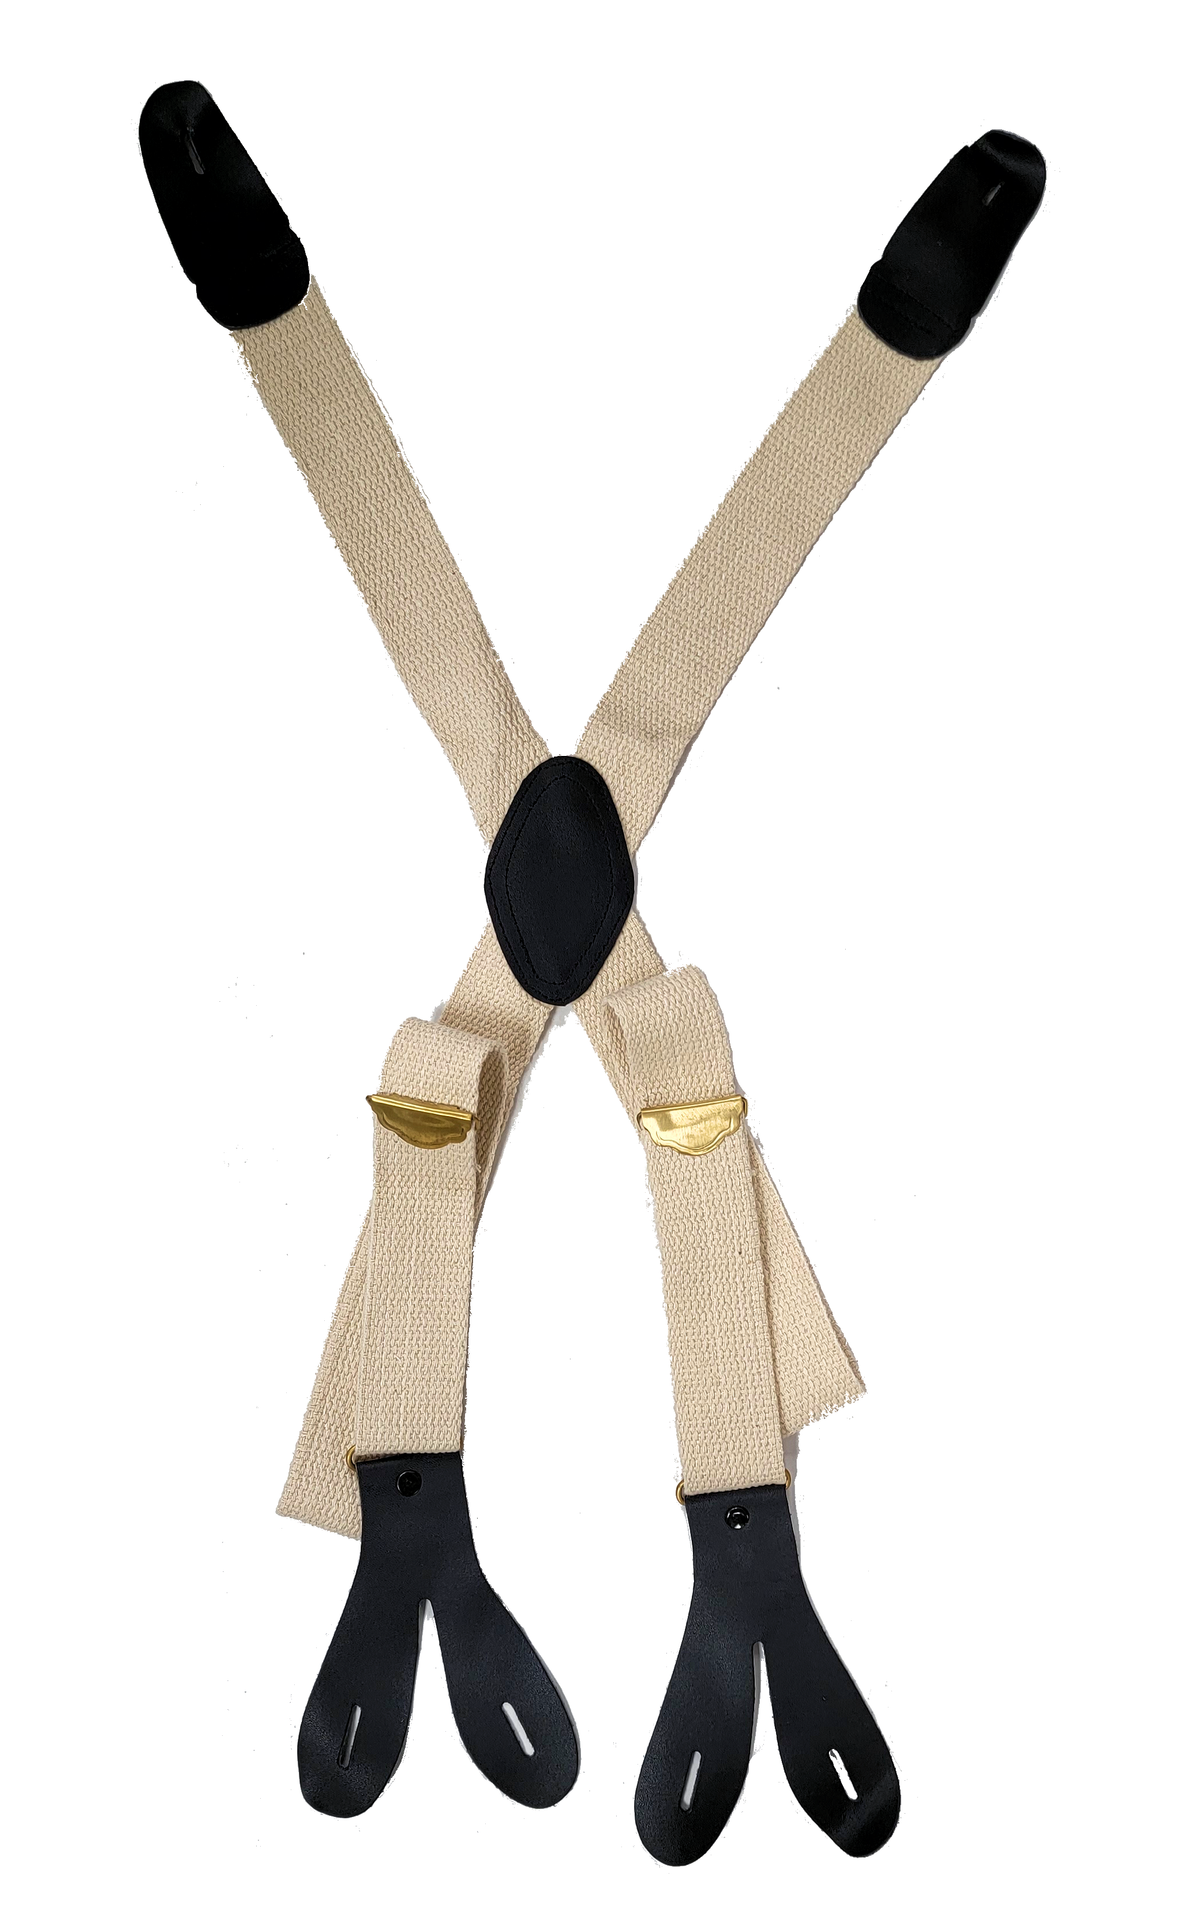 Reenactment Canvas Suspenders with Leather Edge and Brass Buckles